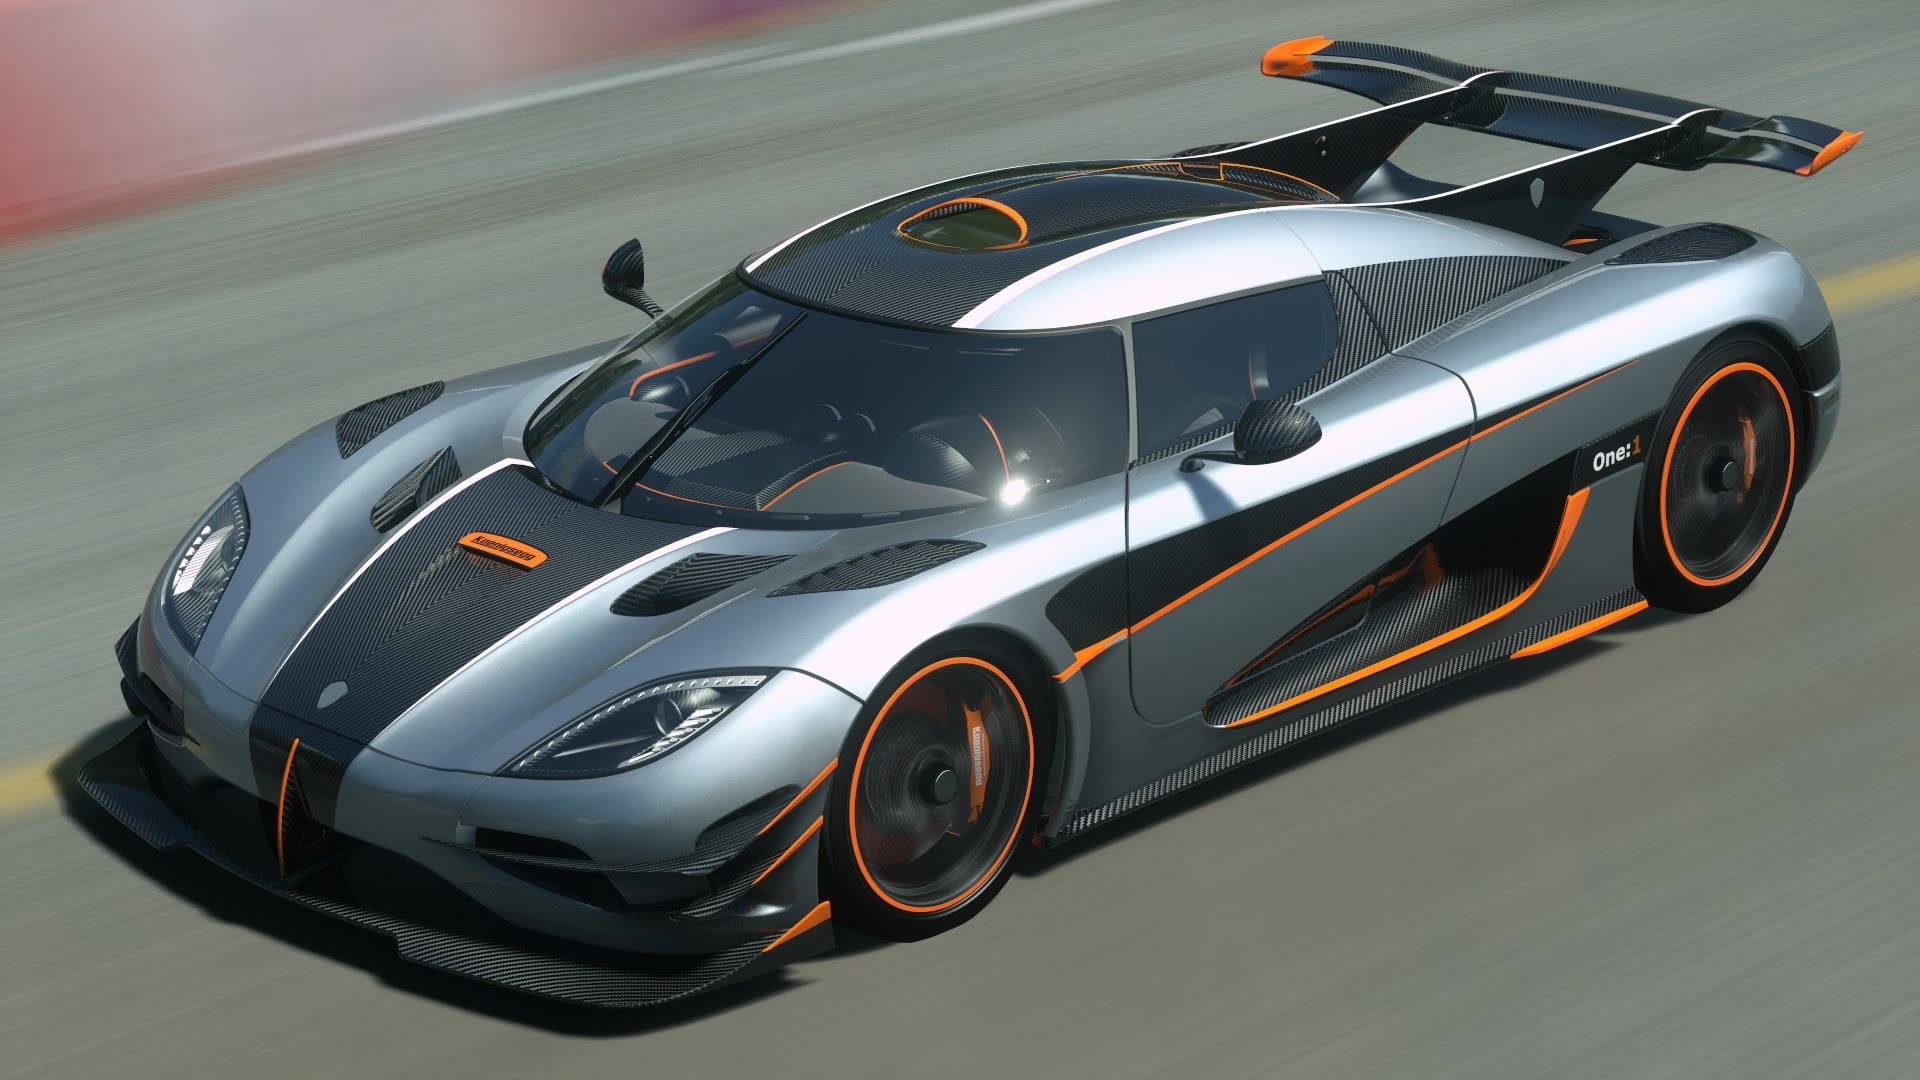 Koenigsegg One:1 Backgrounds, Compatible - PC, Mobile, Gadgets| 1920x1080 px